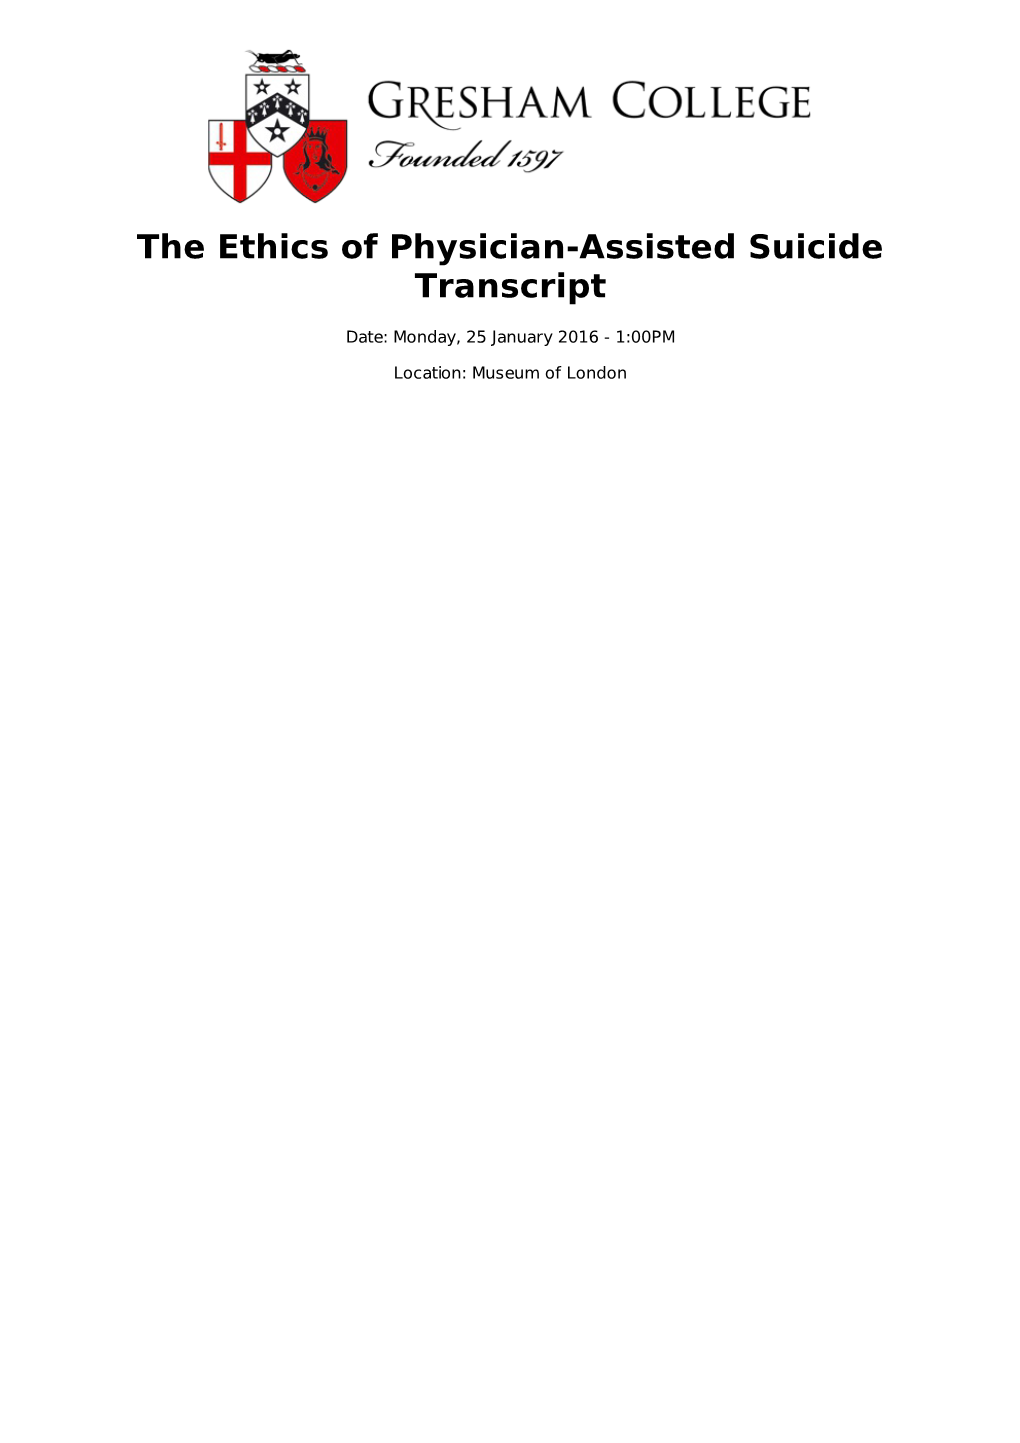 The Ethics of Physician-Assisted Suicide Transcript